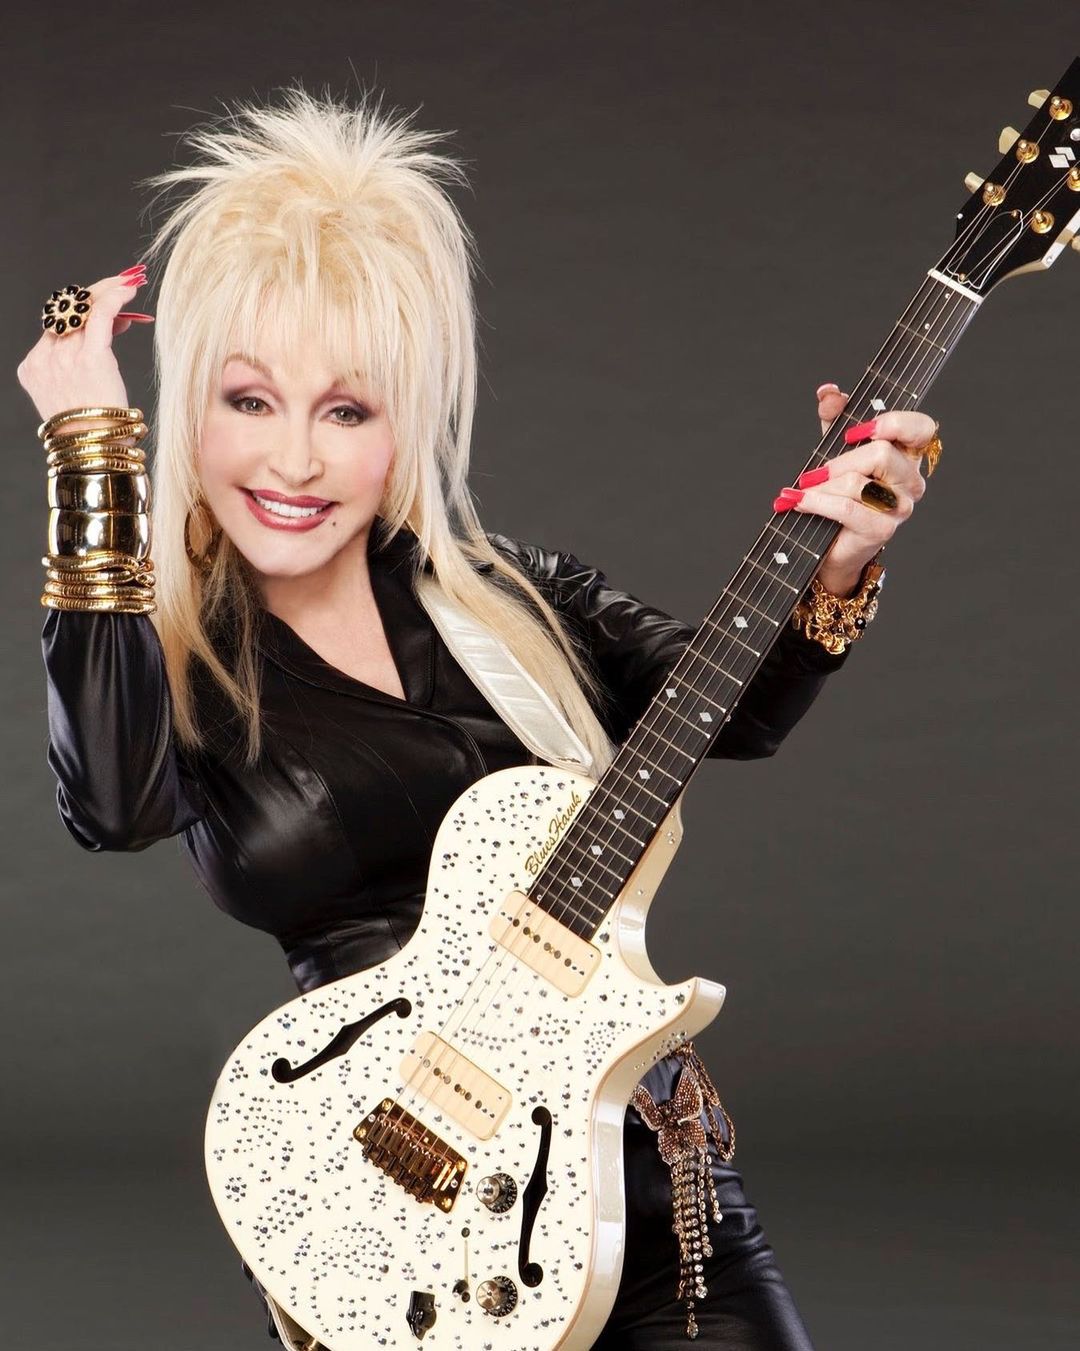 A photo showing Dolly Parton with a guitar in her hand, smiling beautifully as she poses for the camera.